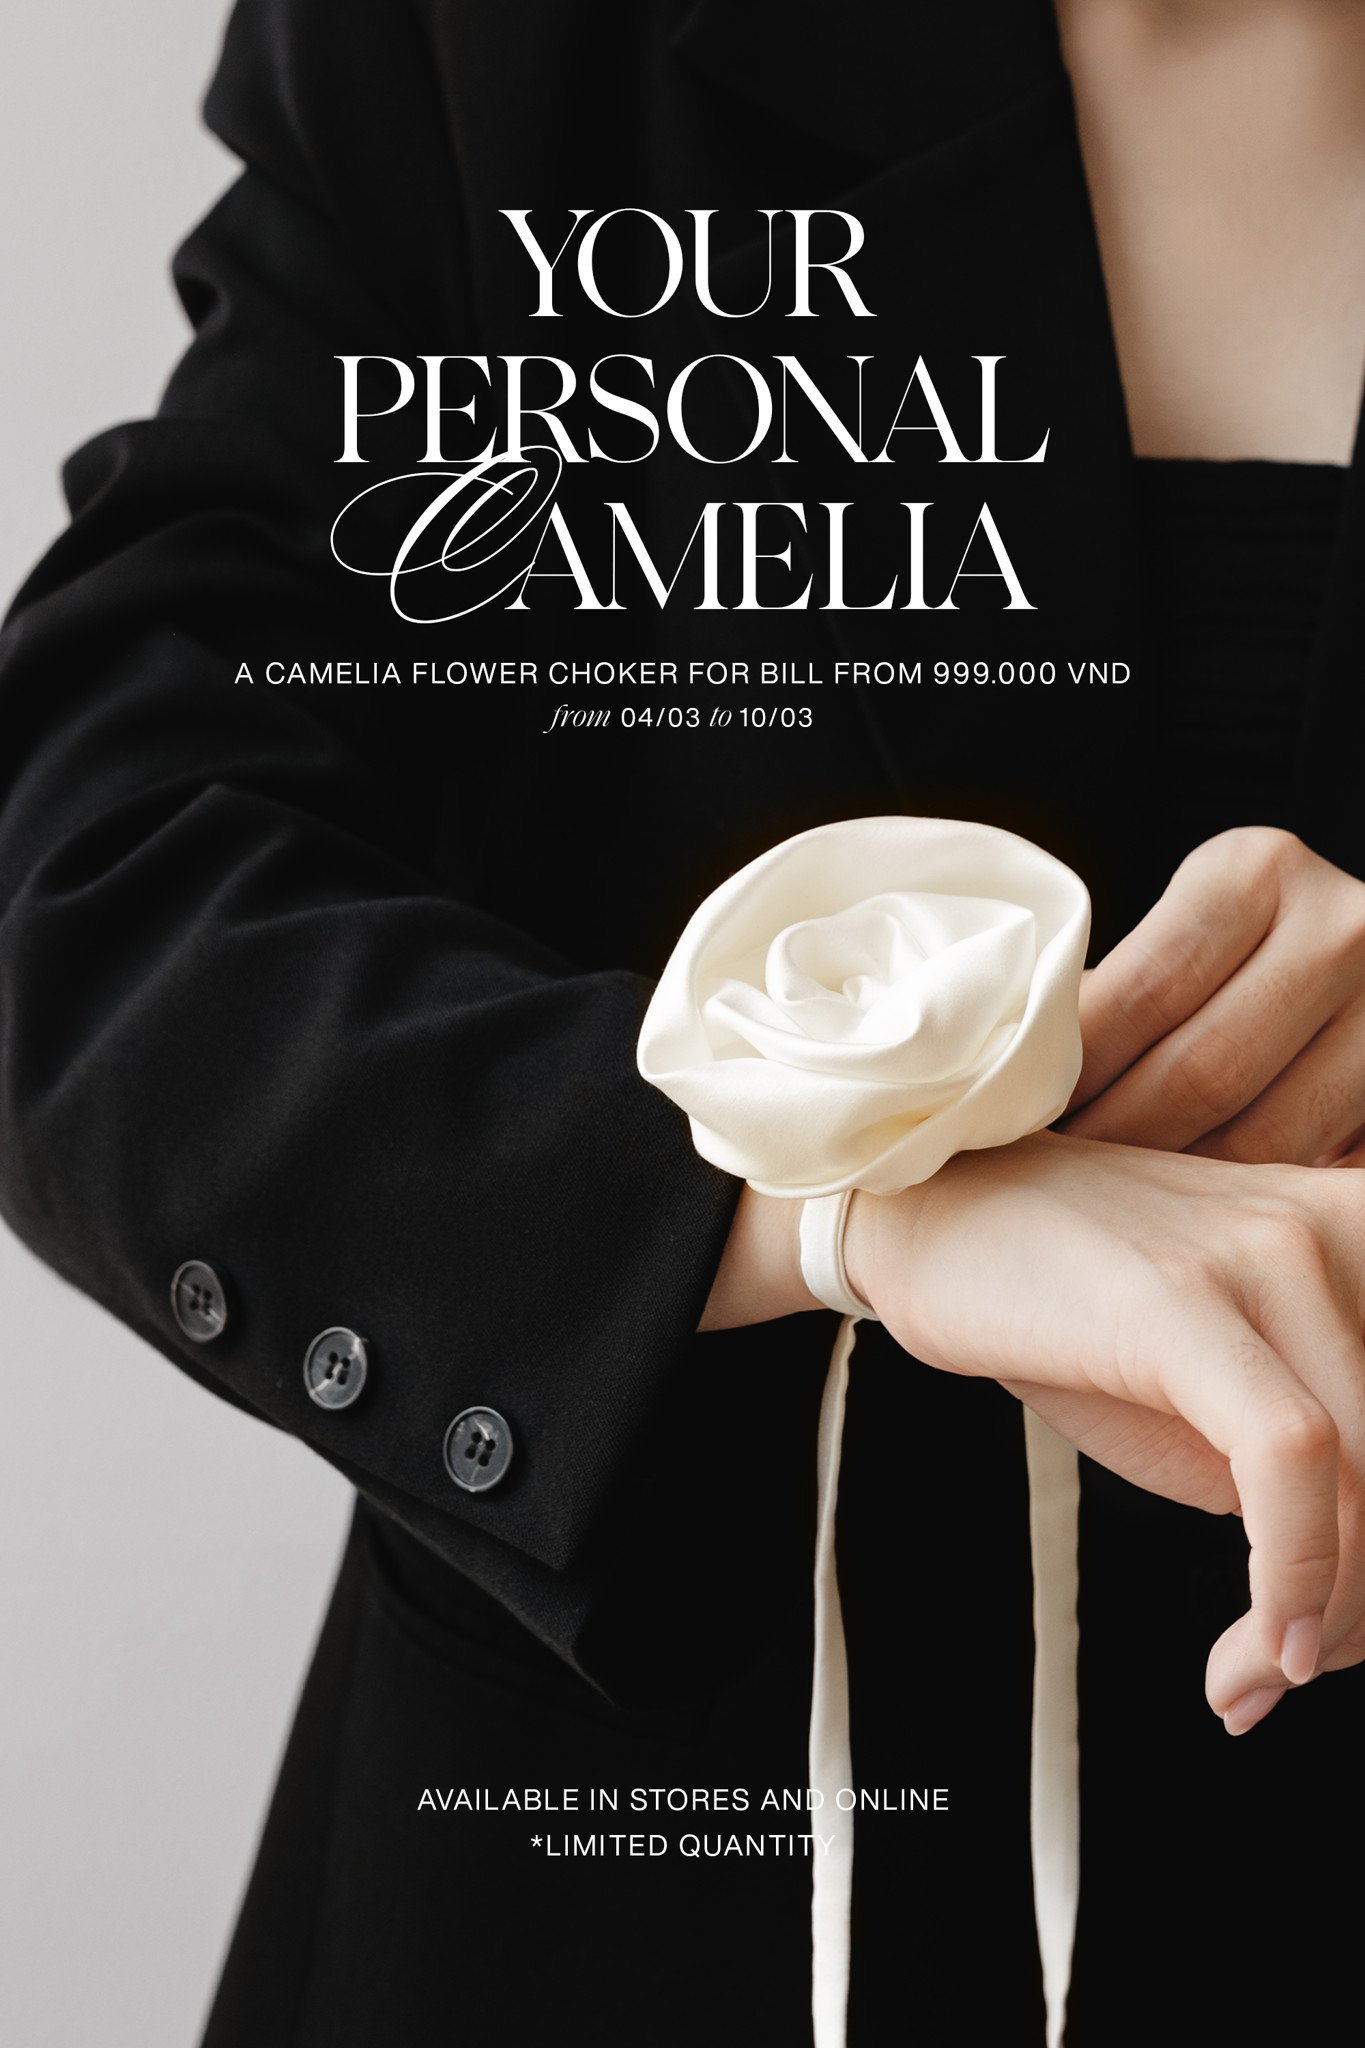 YOUR PERSONAL CAMELIA